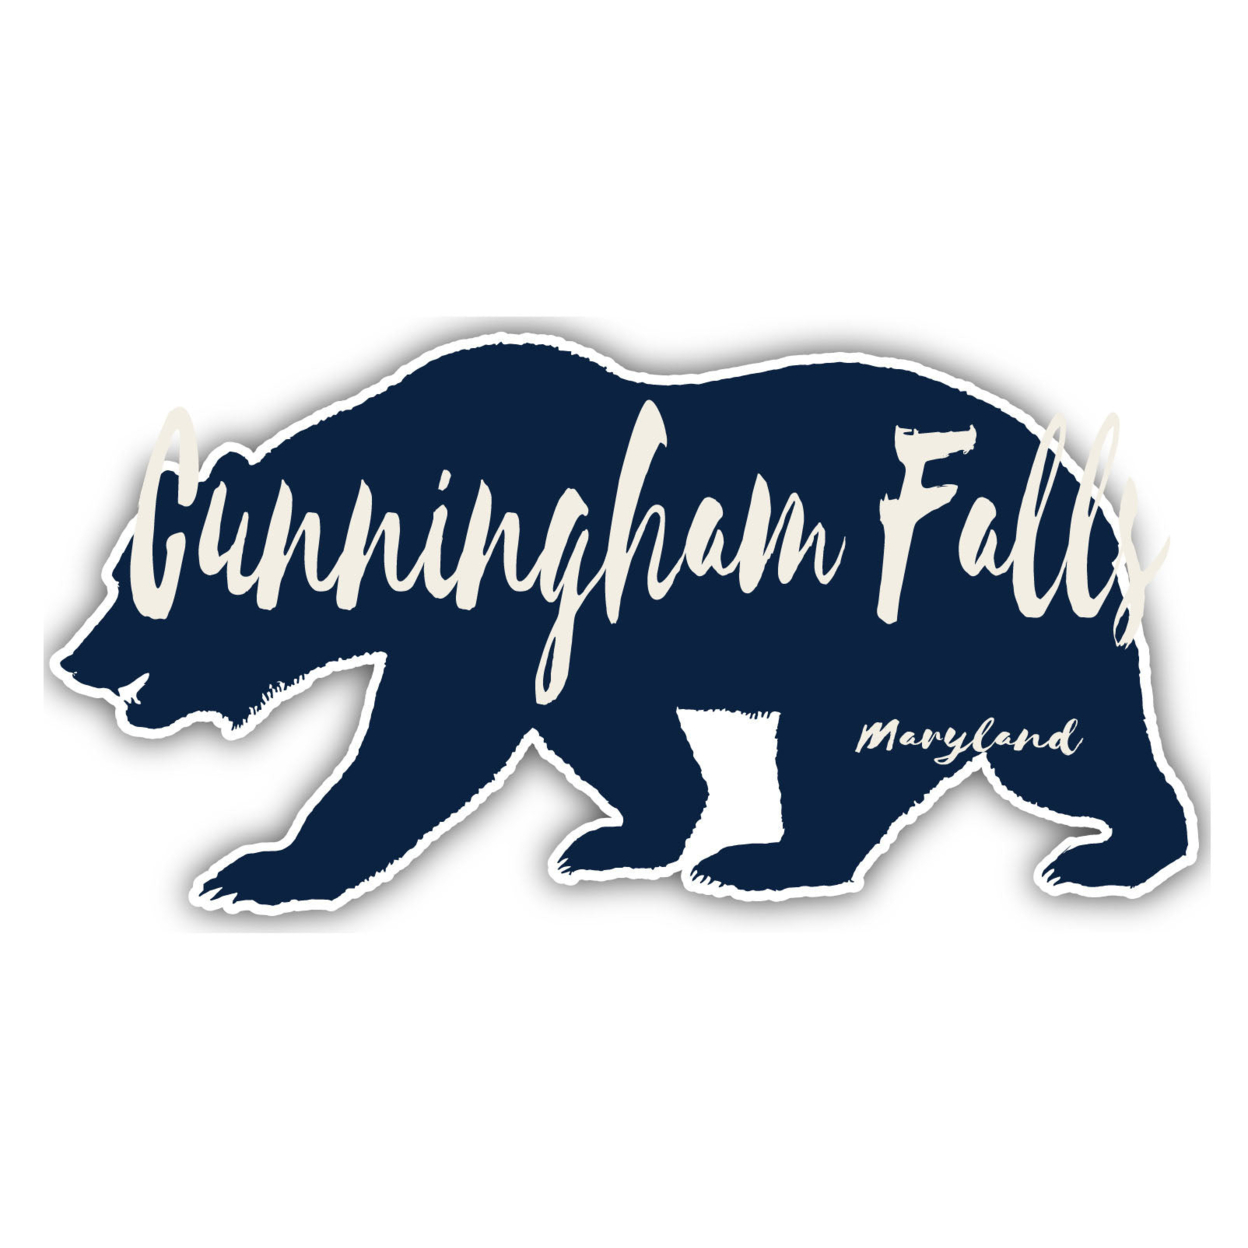 Cunningham Falls Maryland Souvenir Decorative Stickers (Choose Theme And Size) - Single Unit, 6-Inch, Bear